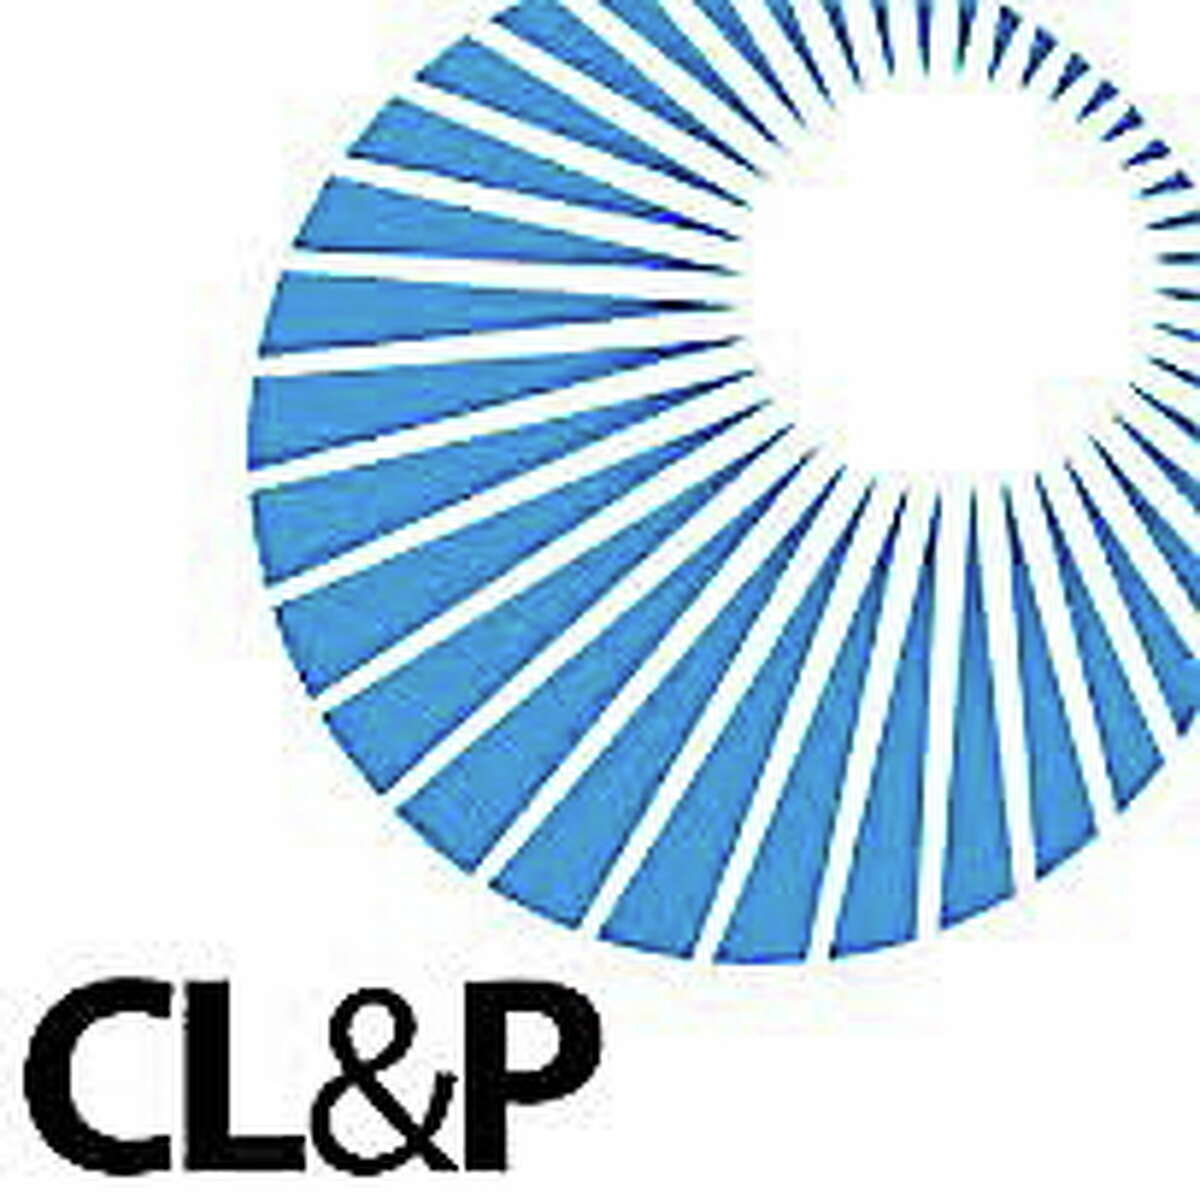 Union Says Cl P Violated Labor